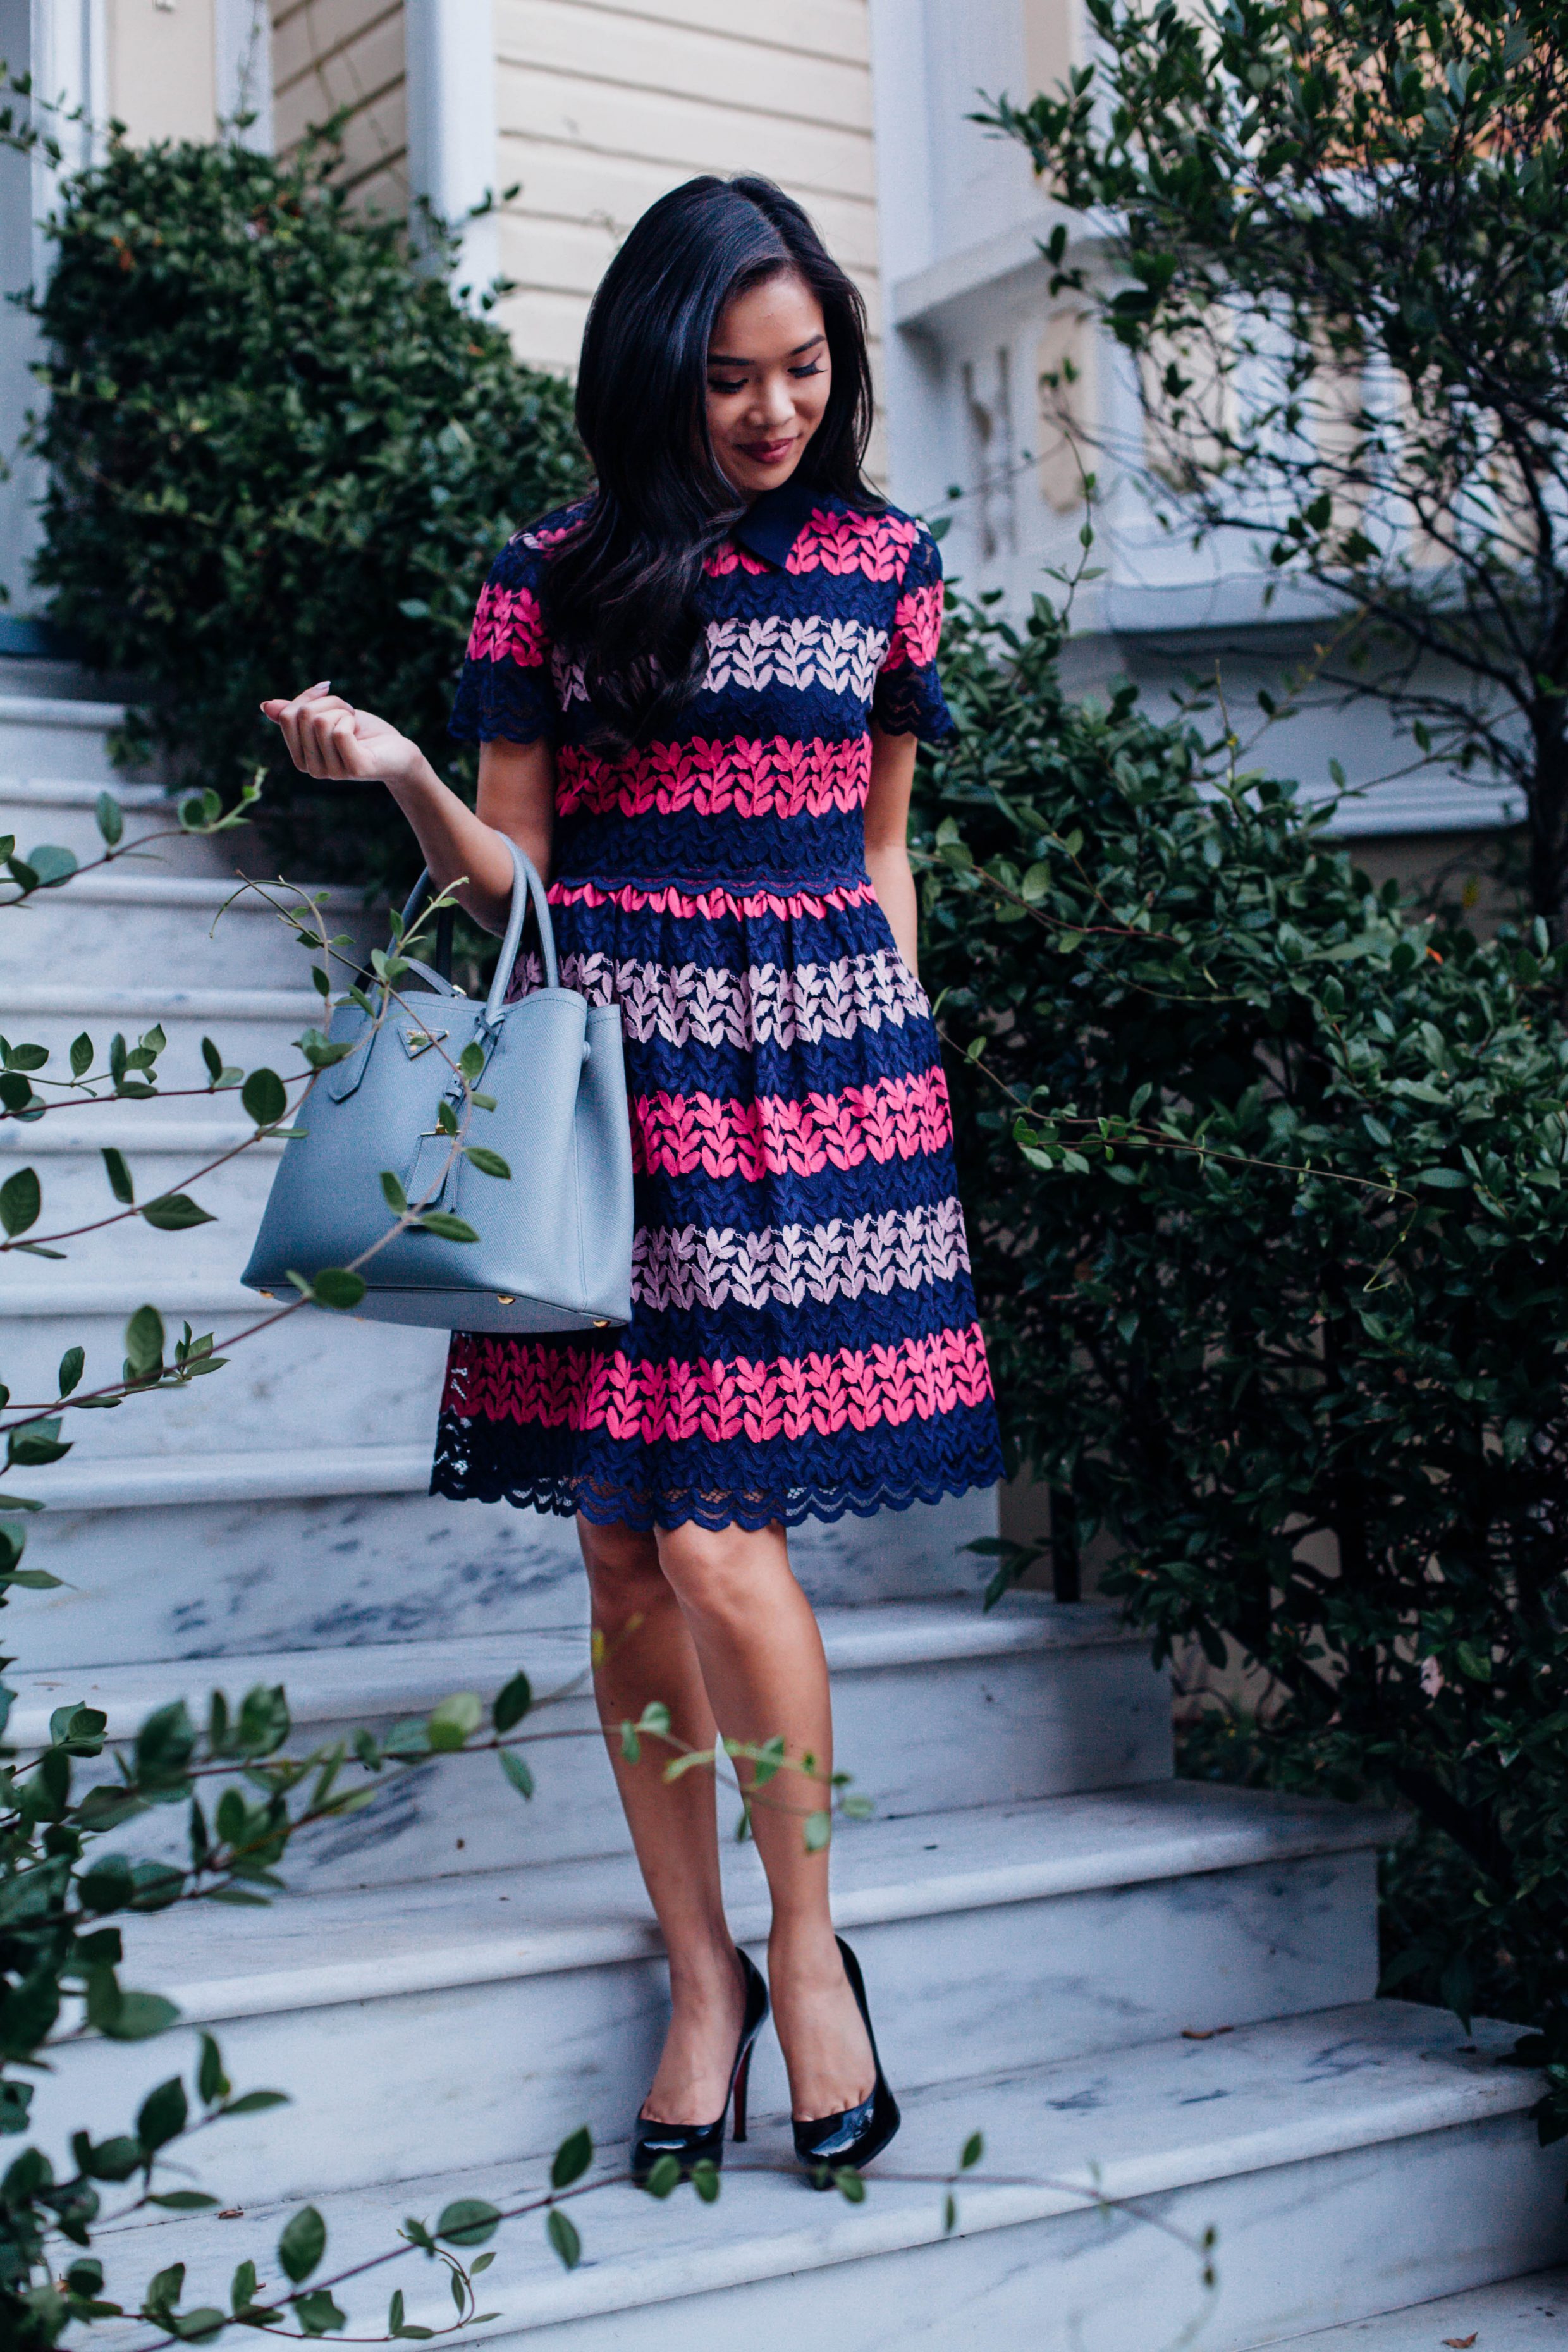 Leaf-Shaped Lace Dress for Fall :: Greetings from Charleston - Color & Chic